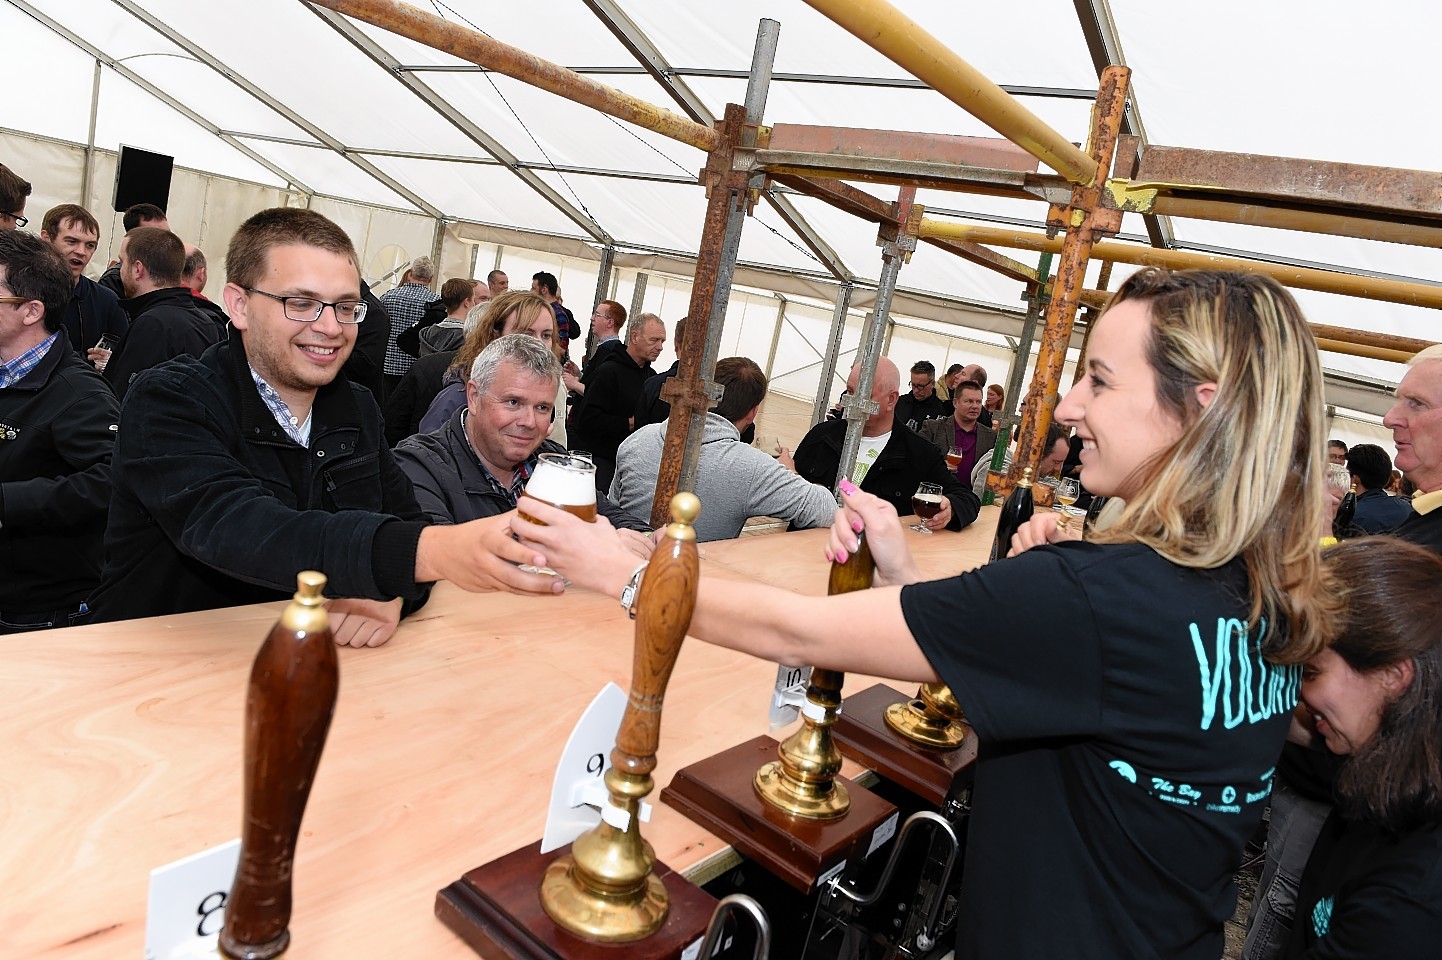 The Midsummer Beer Happening is back in Stonehaven next month, and tickets are going fast.